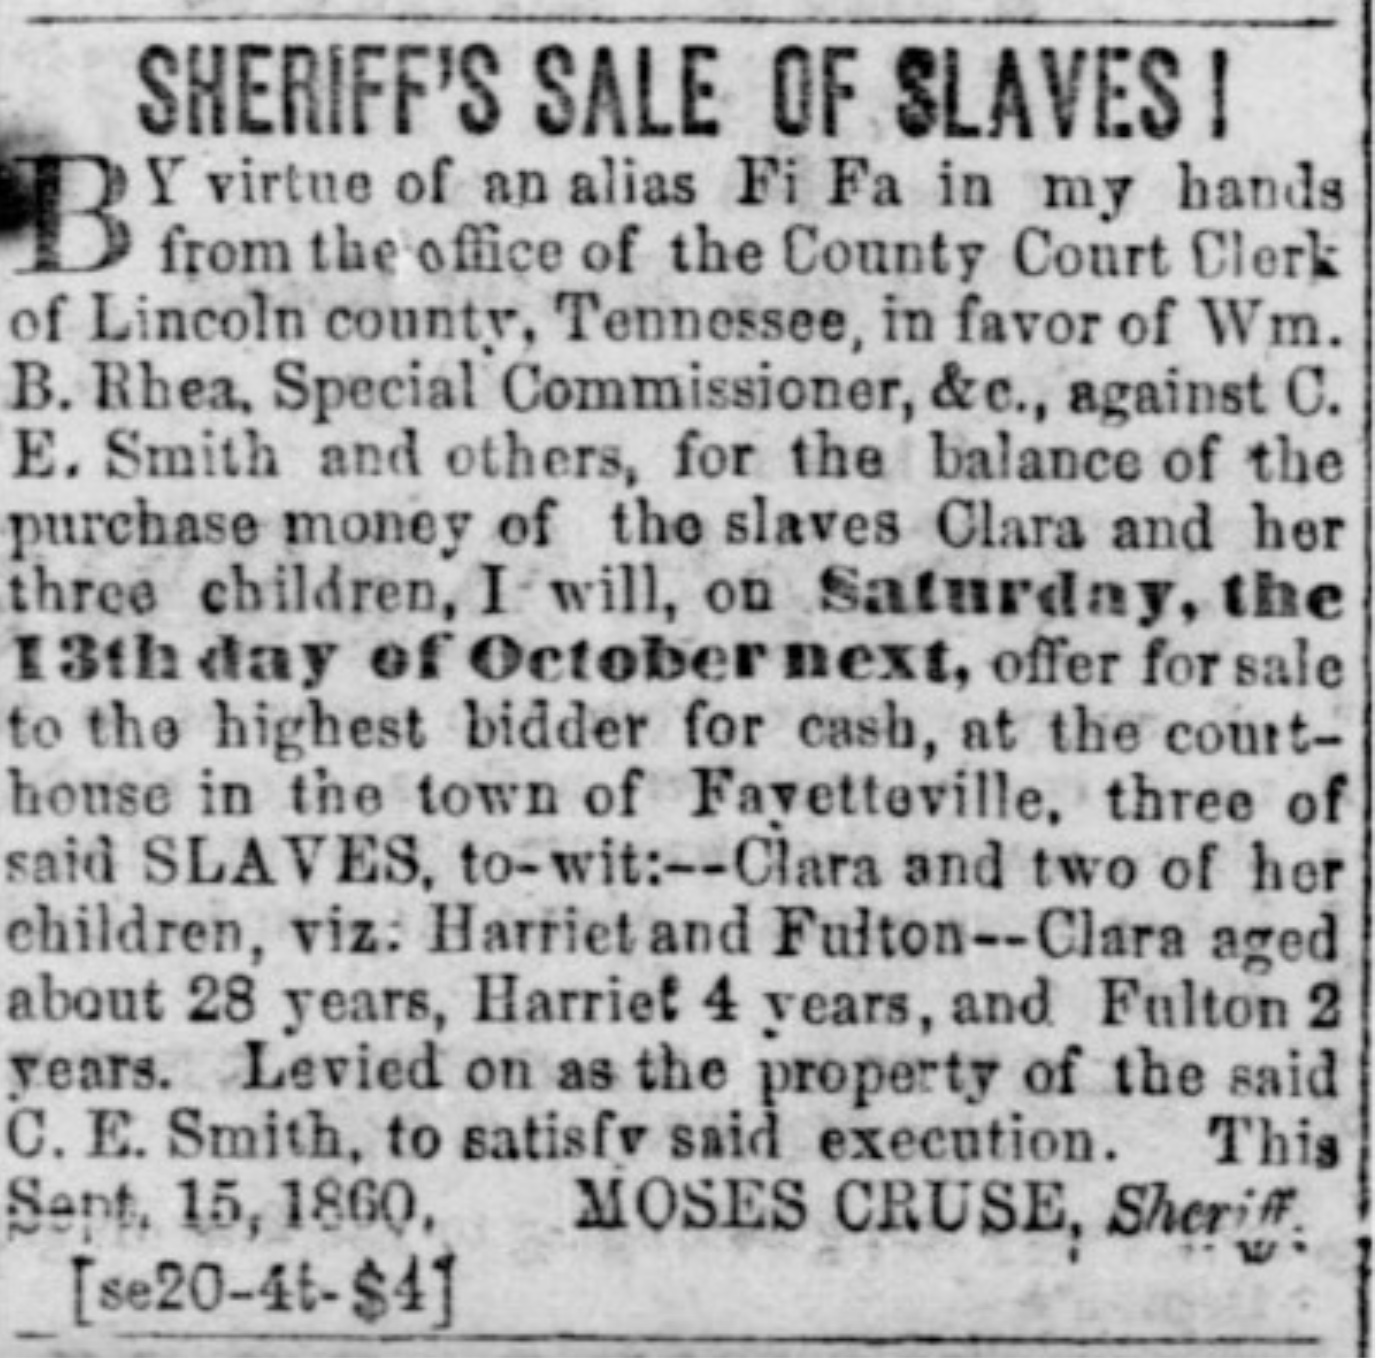 Newspaper clipping showing sale of slaves by a sherriff